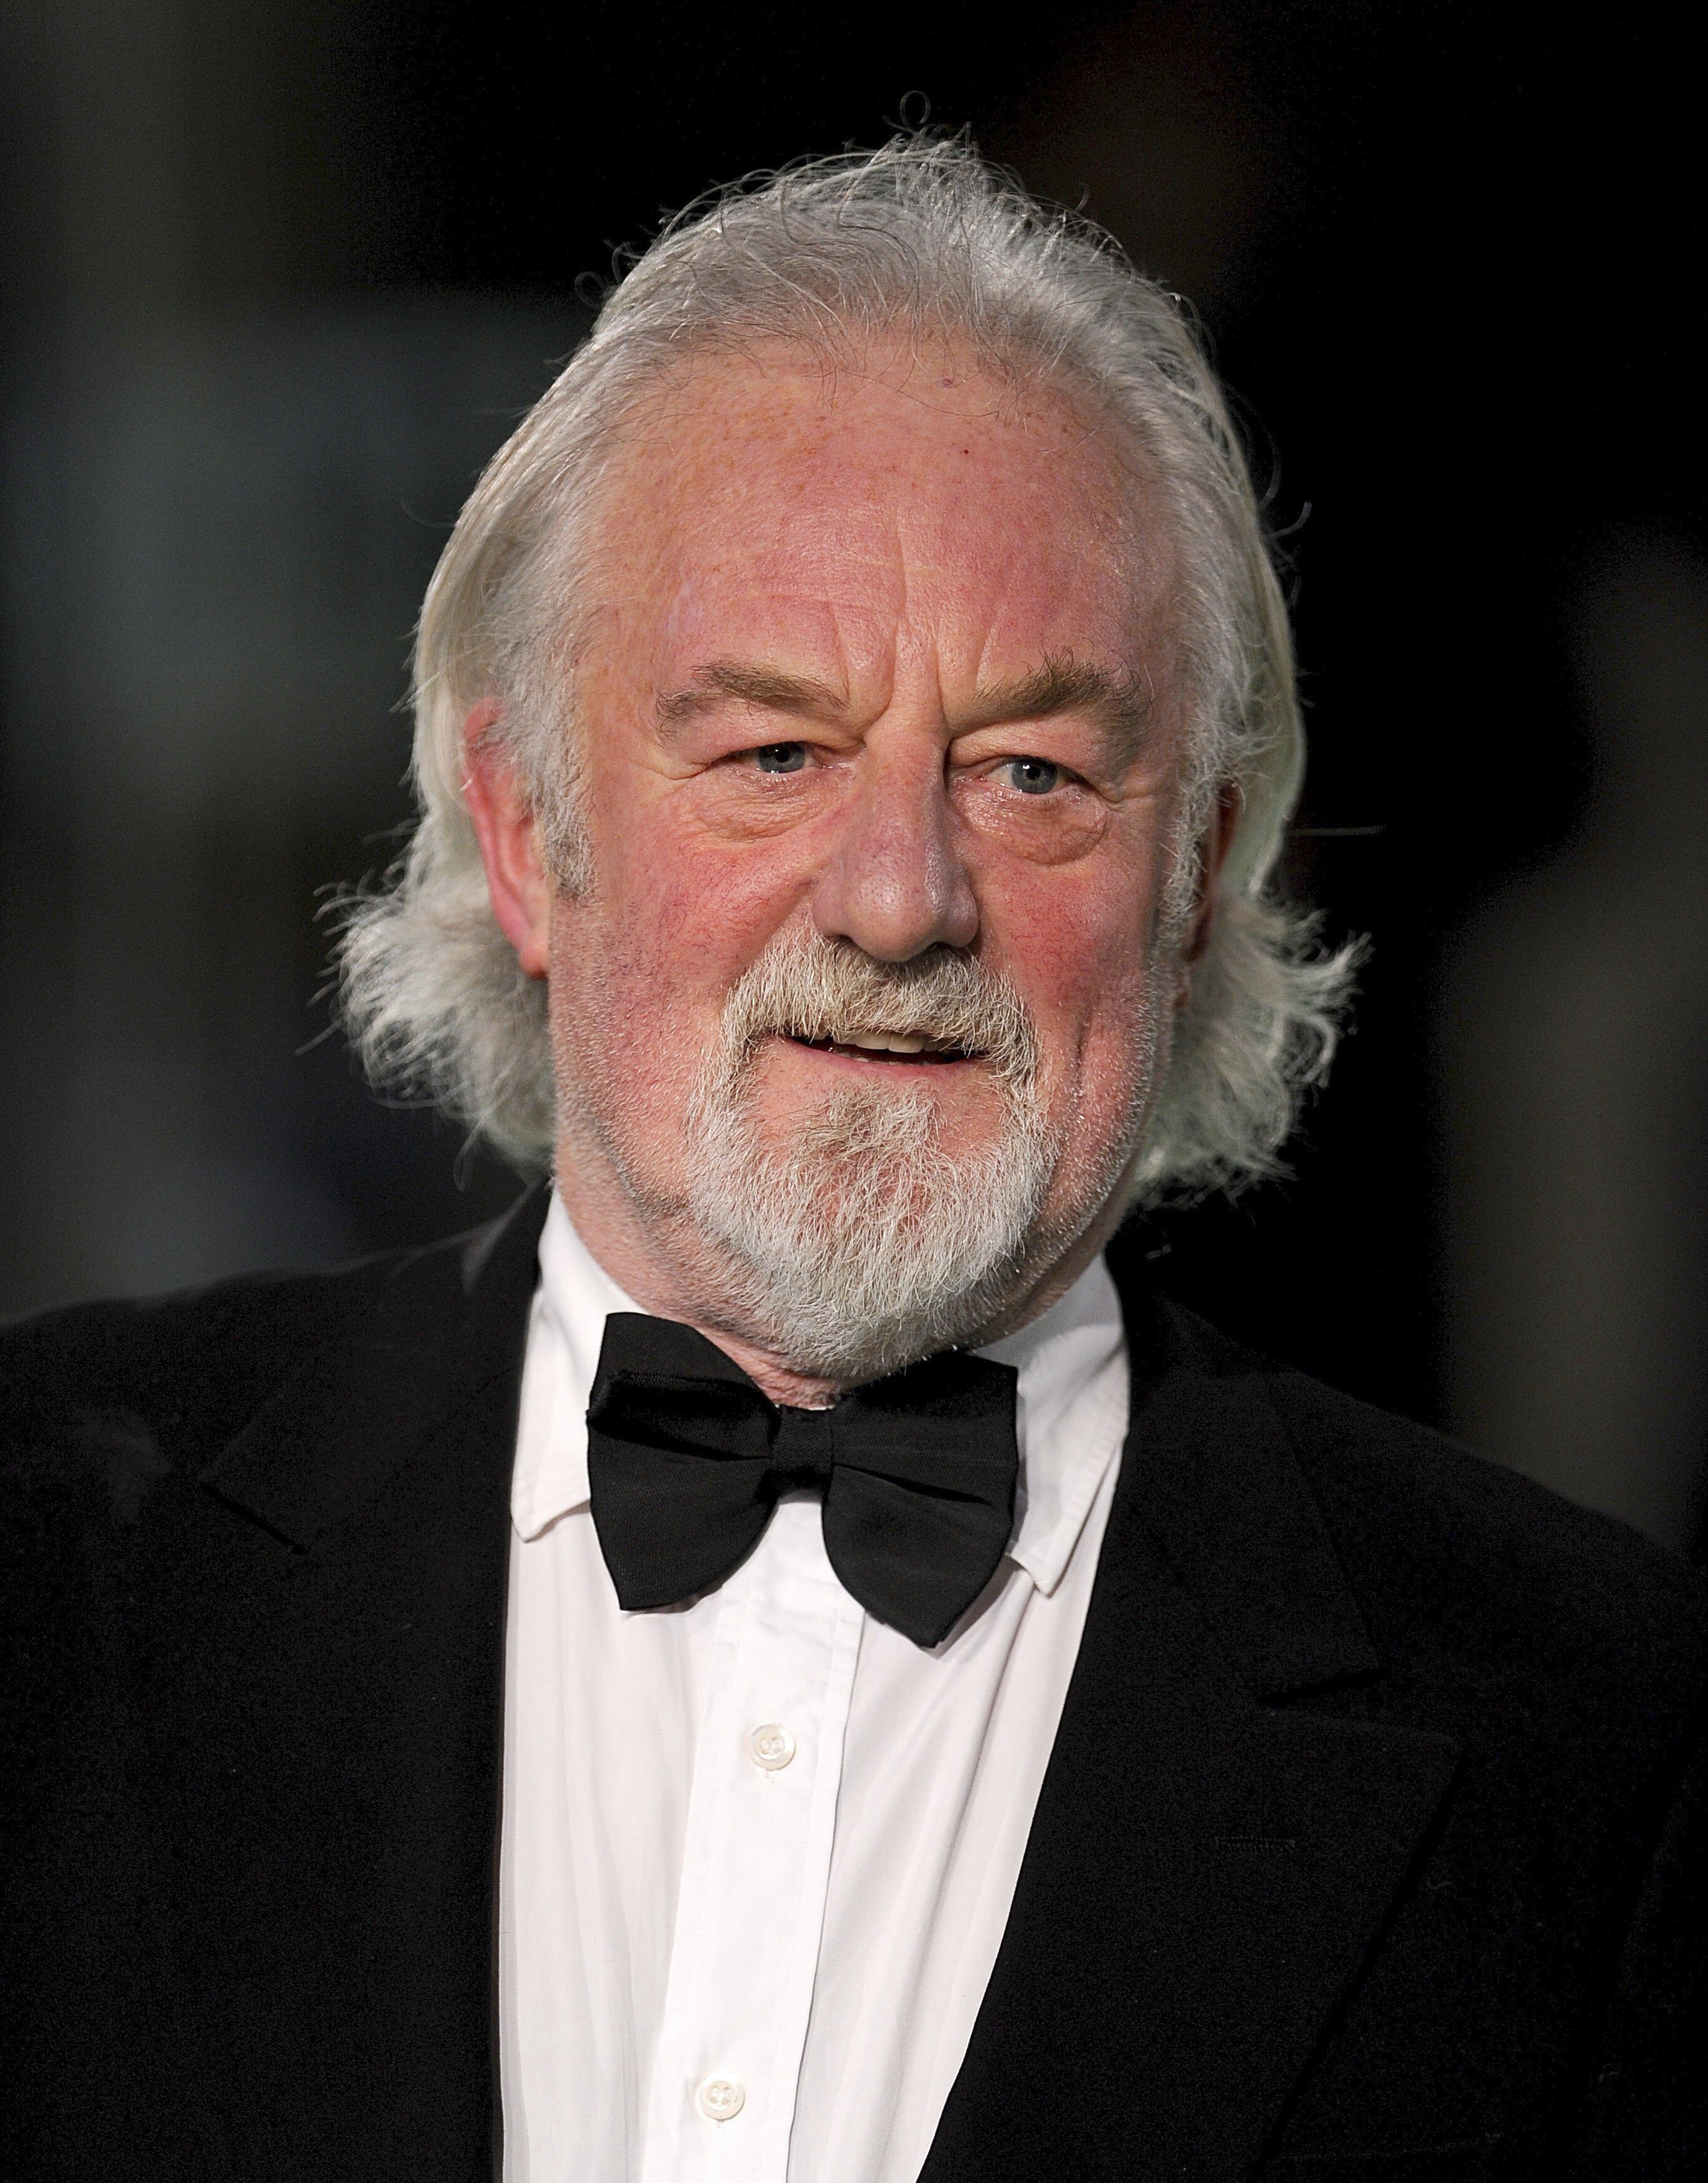 Actor Bernard Hill, who delivered a rousing battle cry before leading his people into battle...